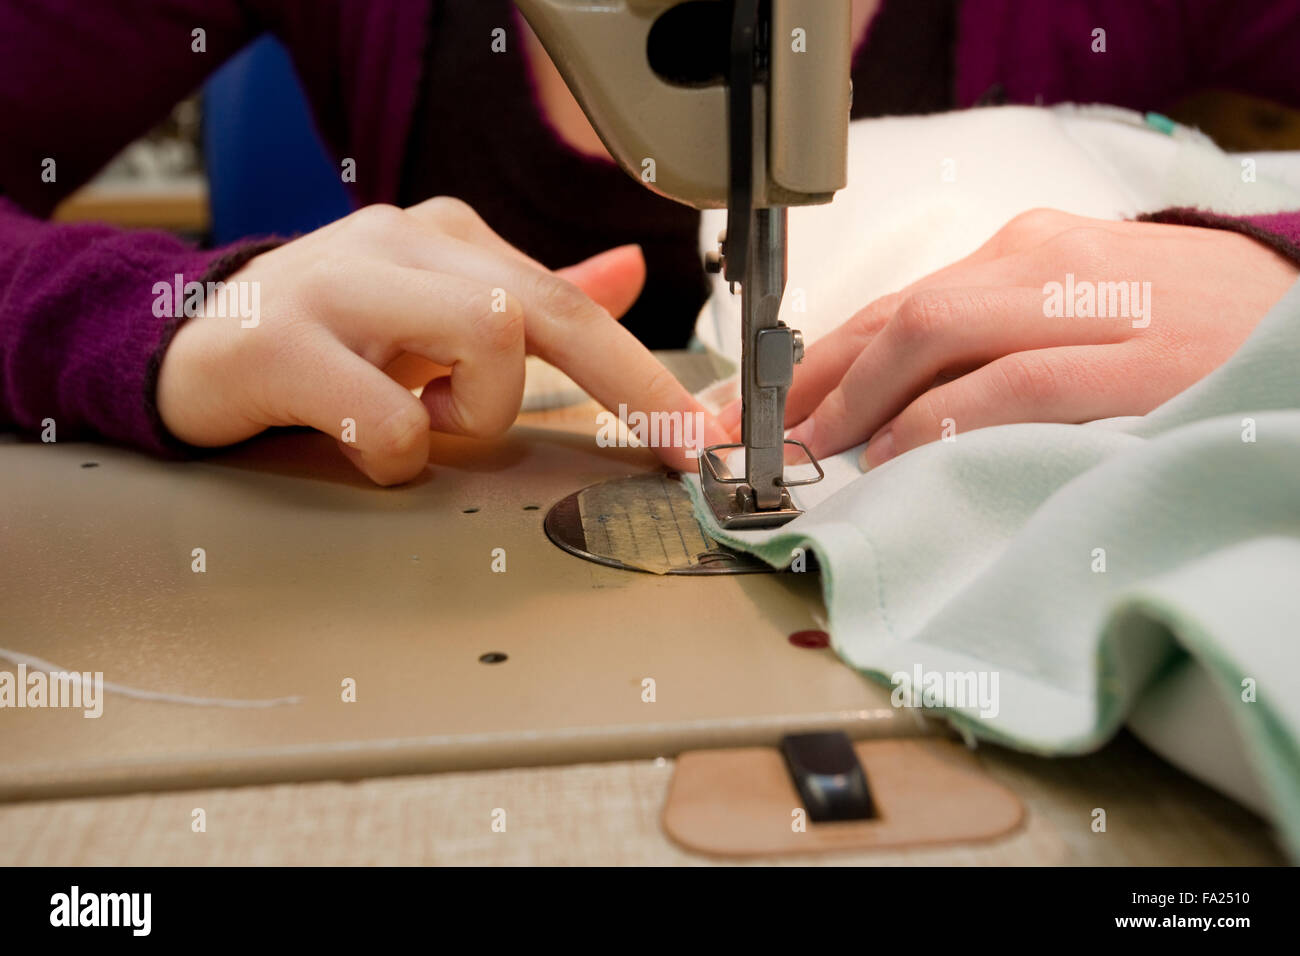 Custom tailor works at a sewing machine. Stock Photo